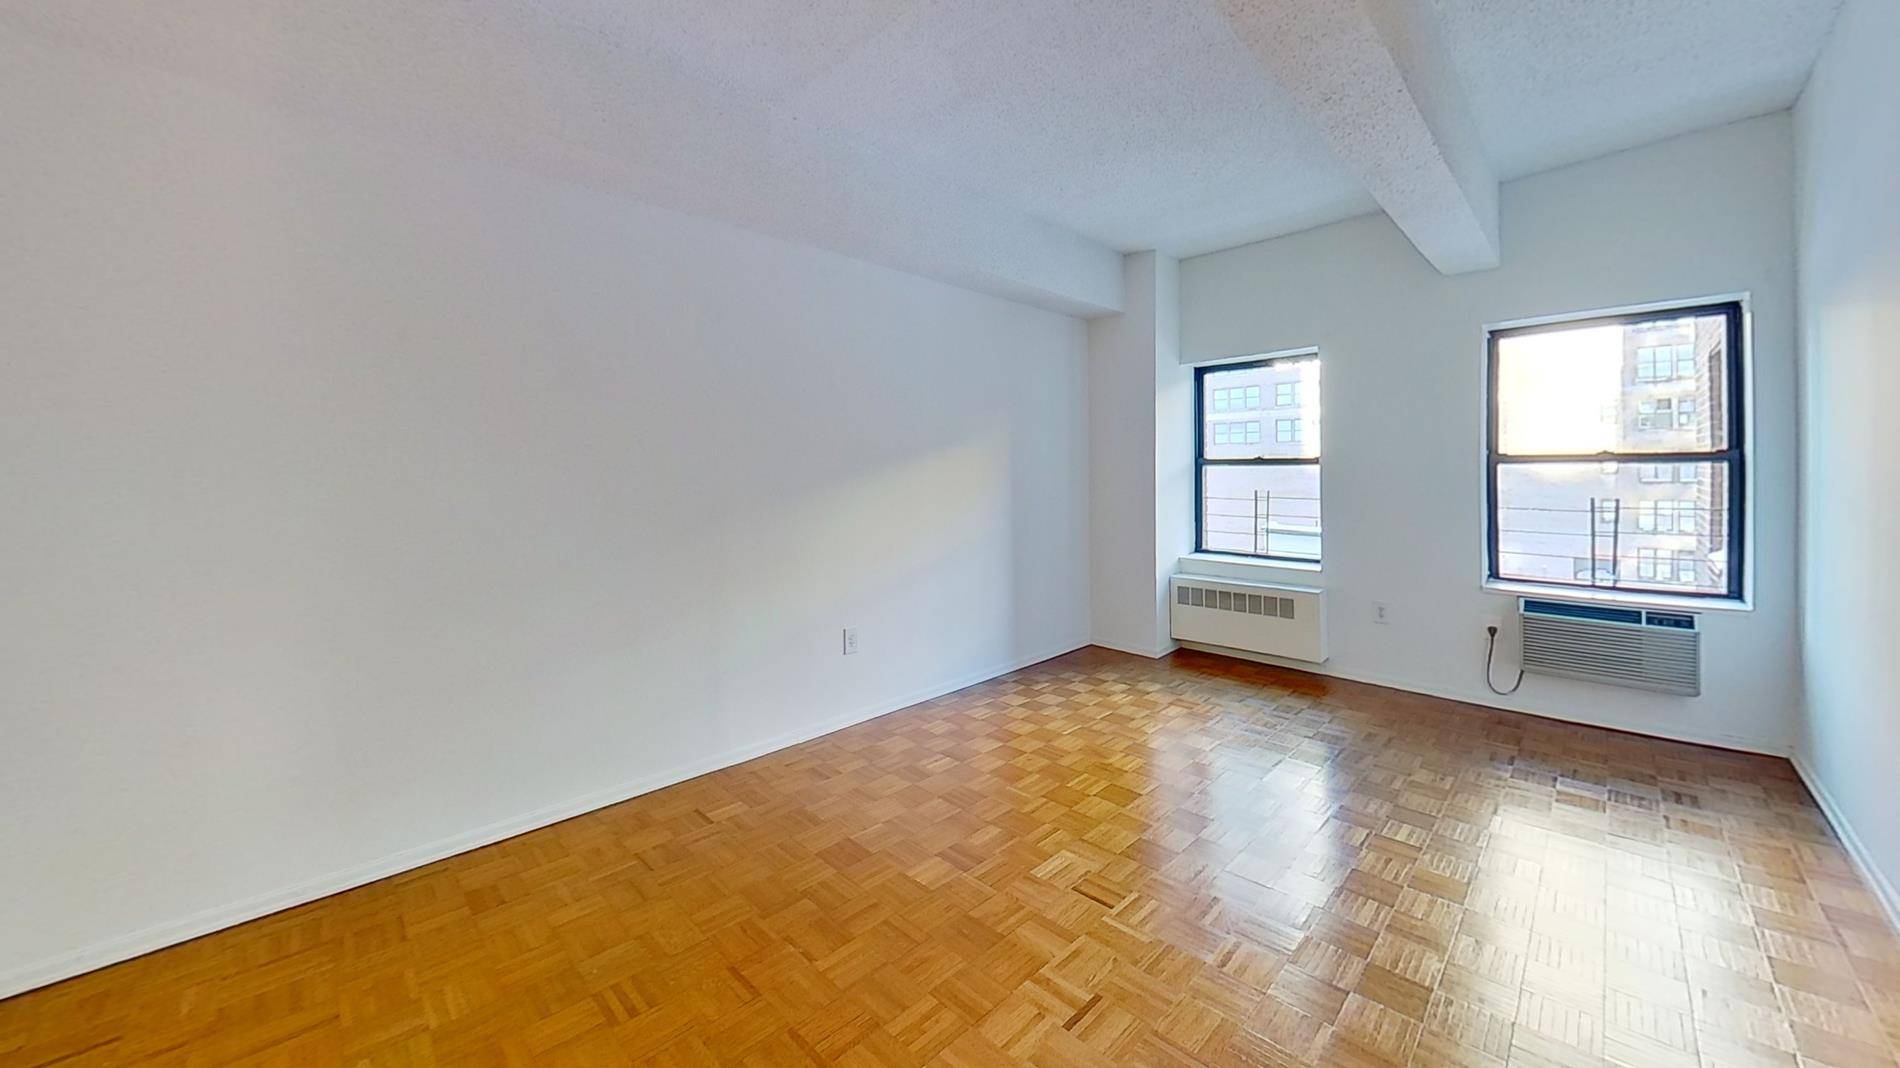 Welcome to luxury living with this exquisite one bedroom apartment located in the astounding elevator doorman building in the heart of NYC.